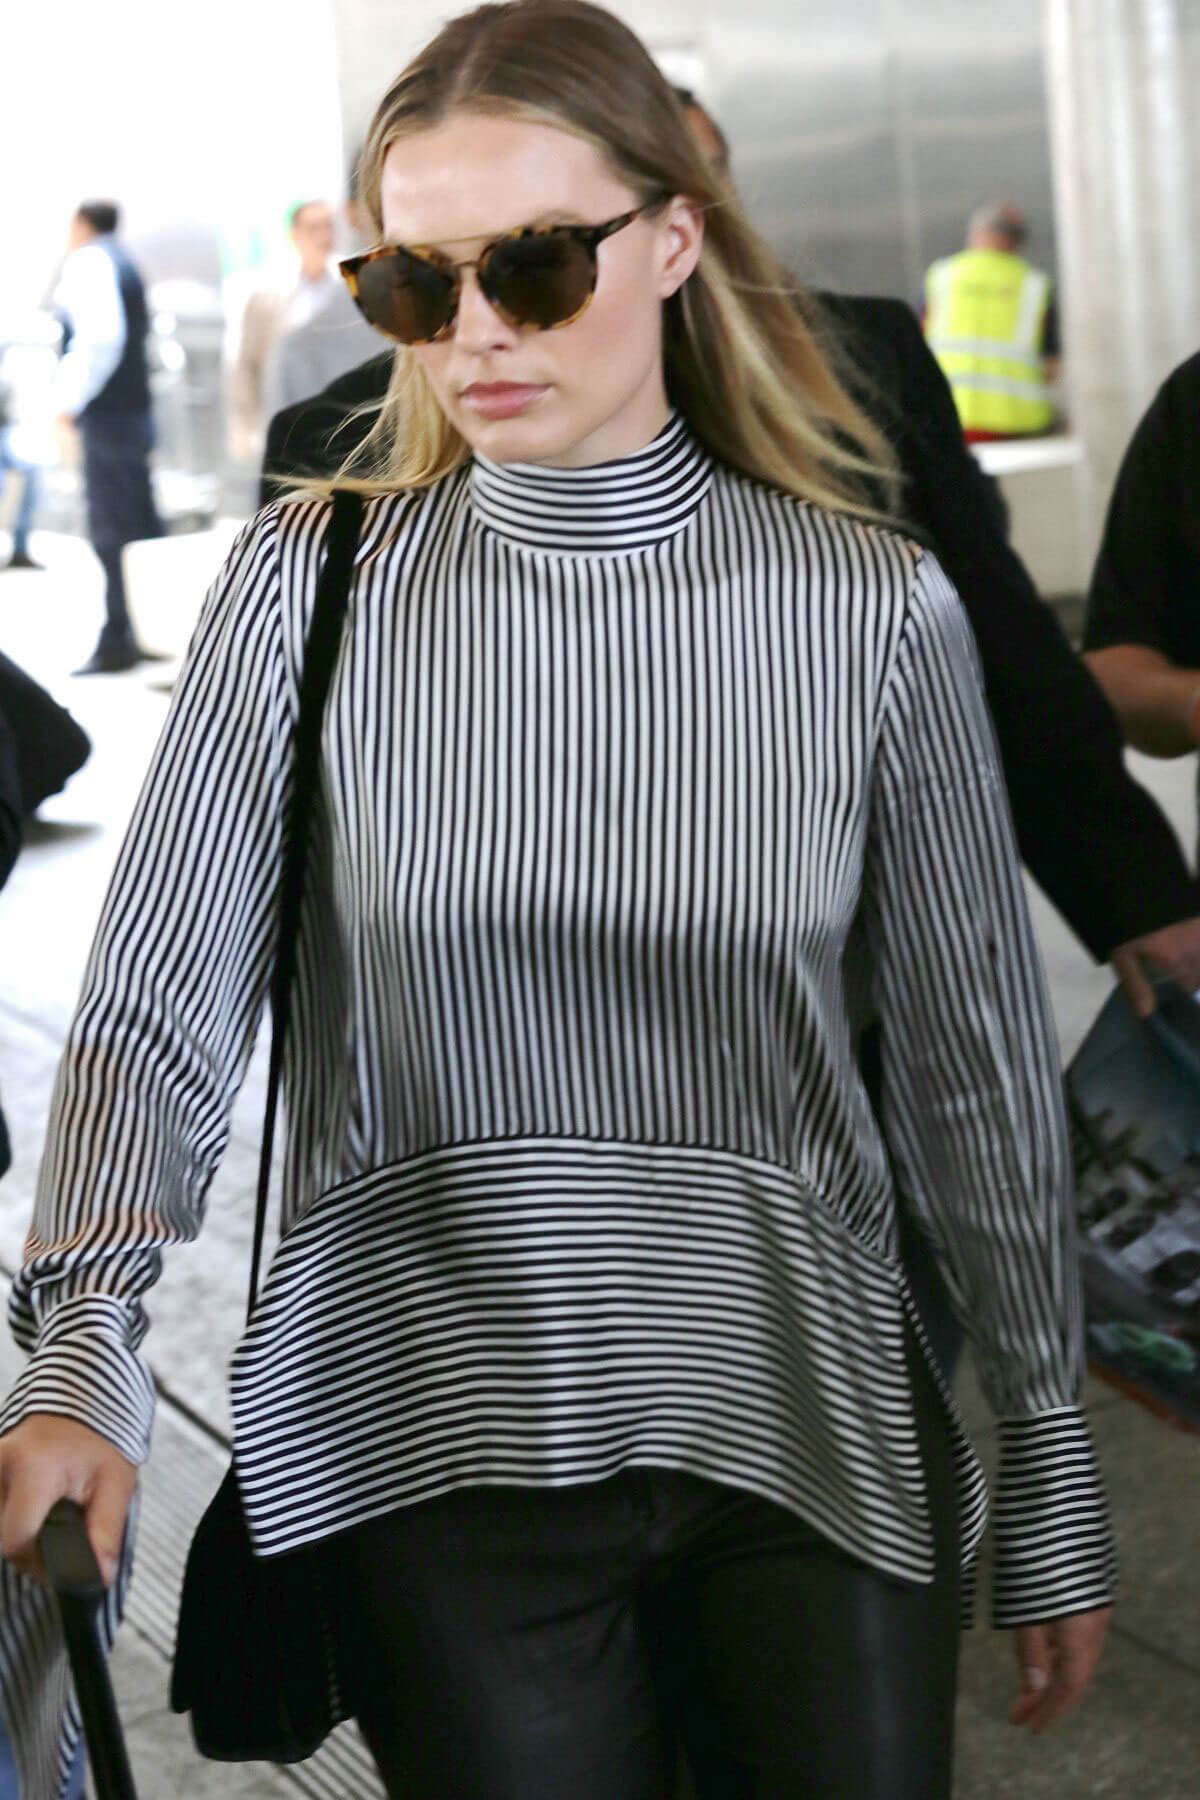 Margot Robbie at LAX Airport in Los Angeles